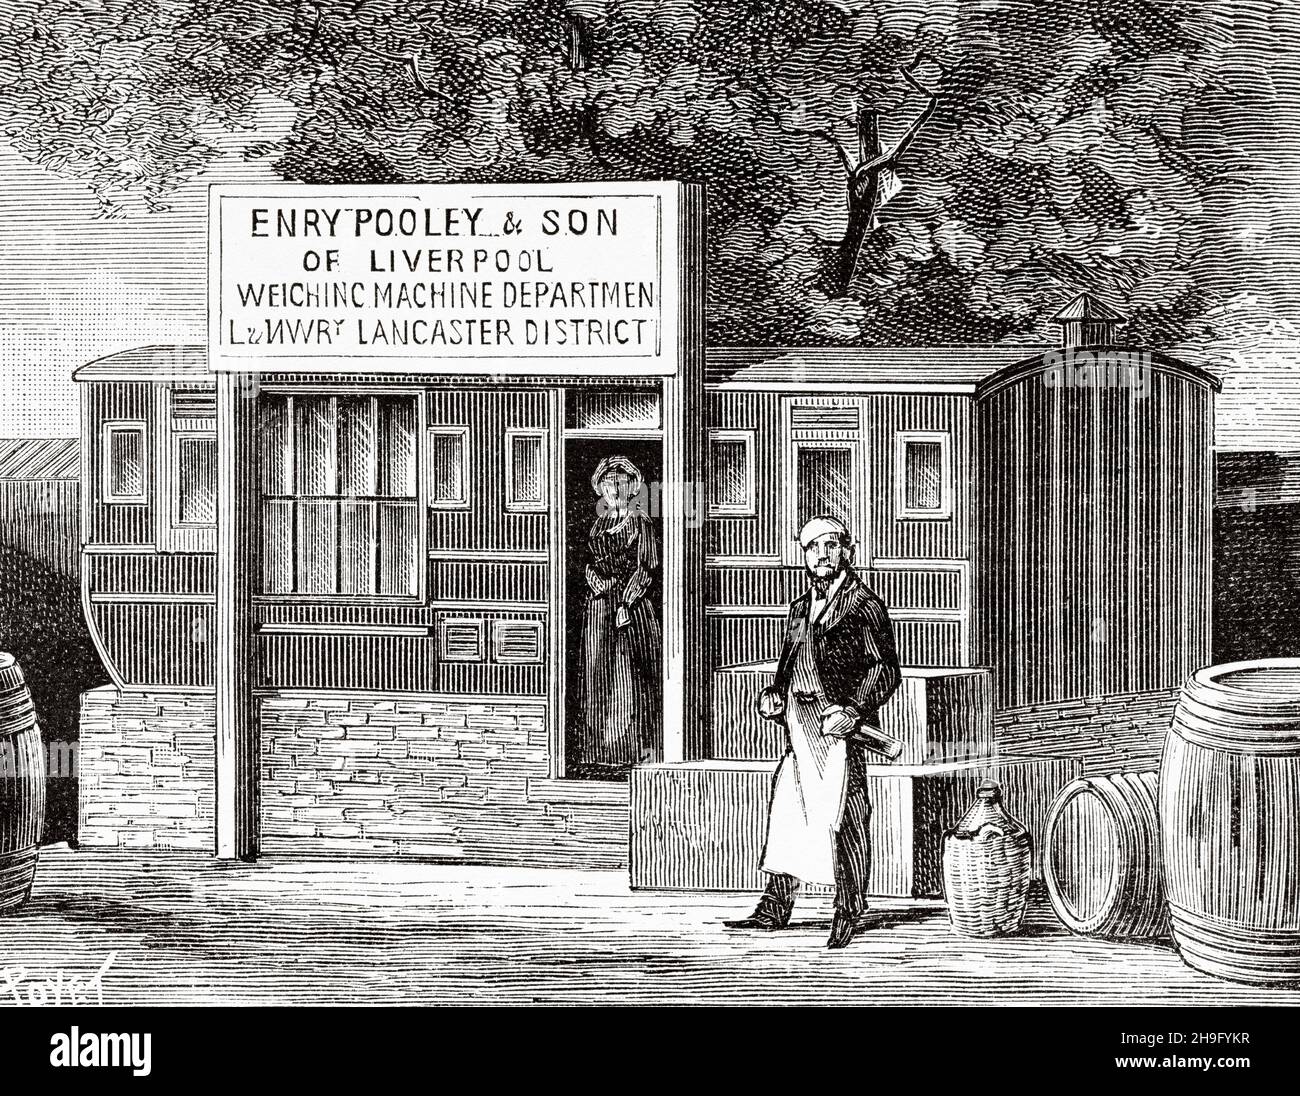 Dwelling in an old railway carriage in England. Old 19th century engraved illustration from La Nature 1885 Stock Photo